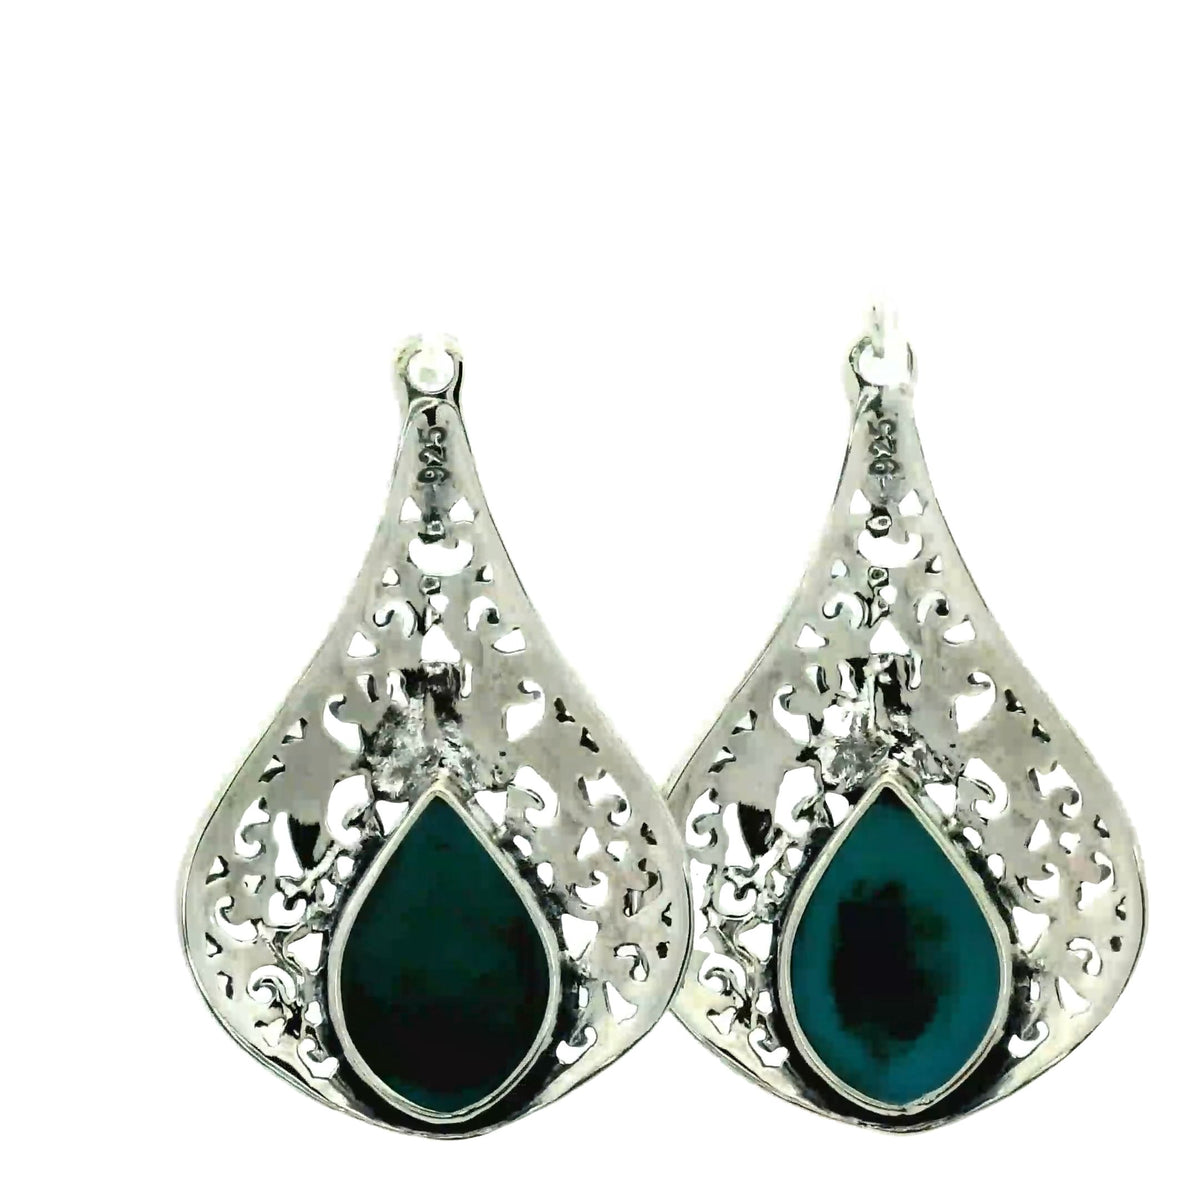 Onatah Sterling Silver Filigree Drop Earrings With Turquoise